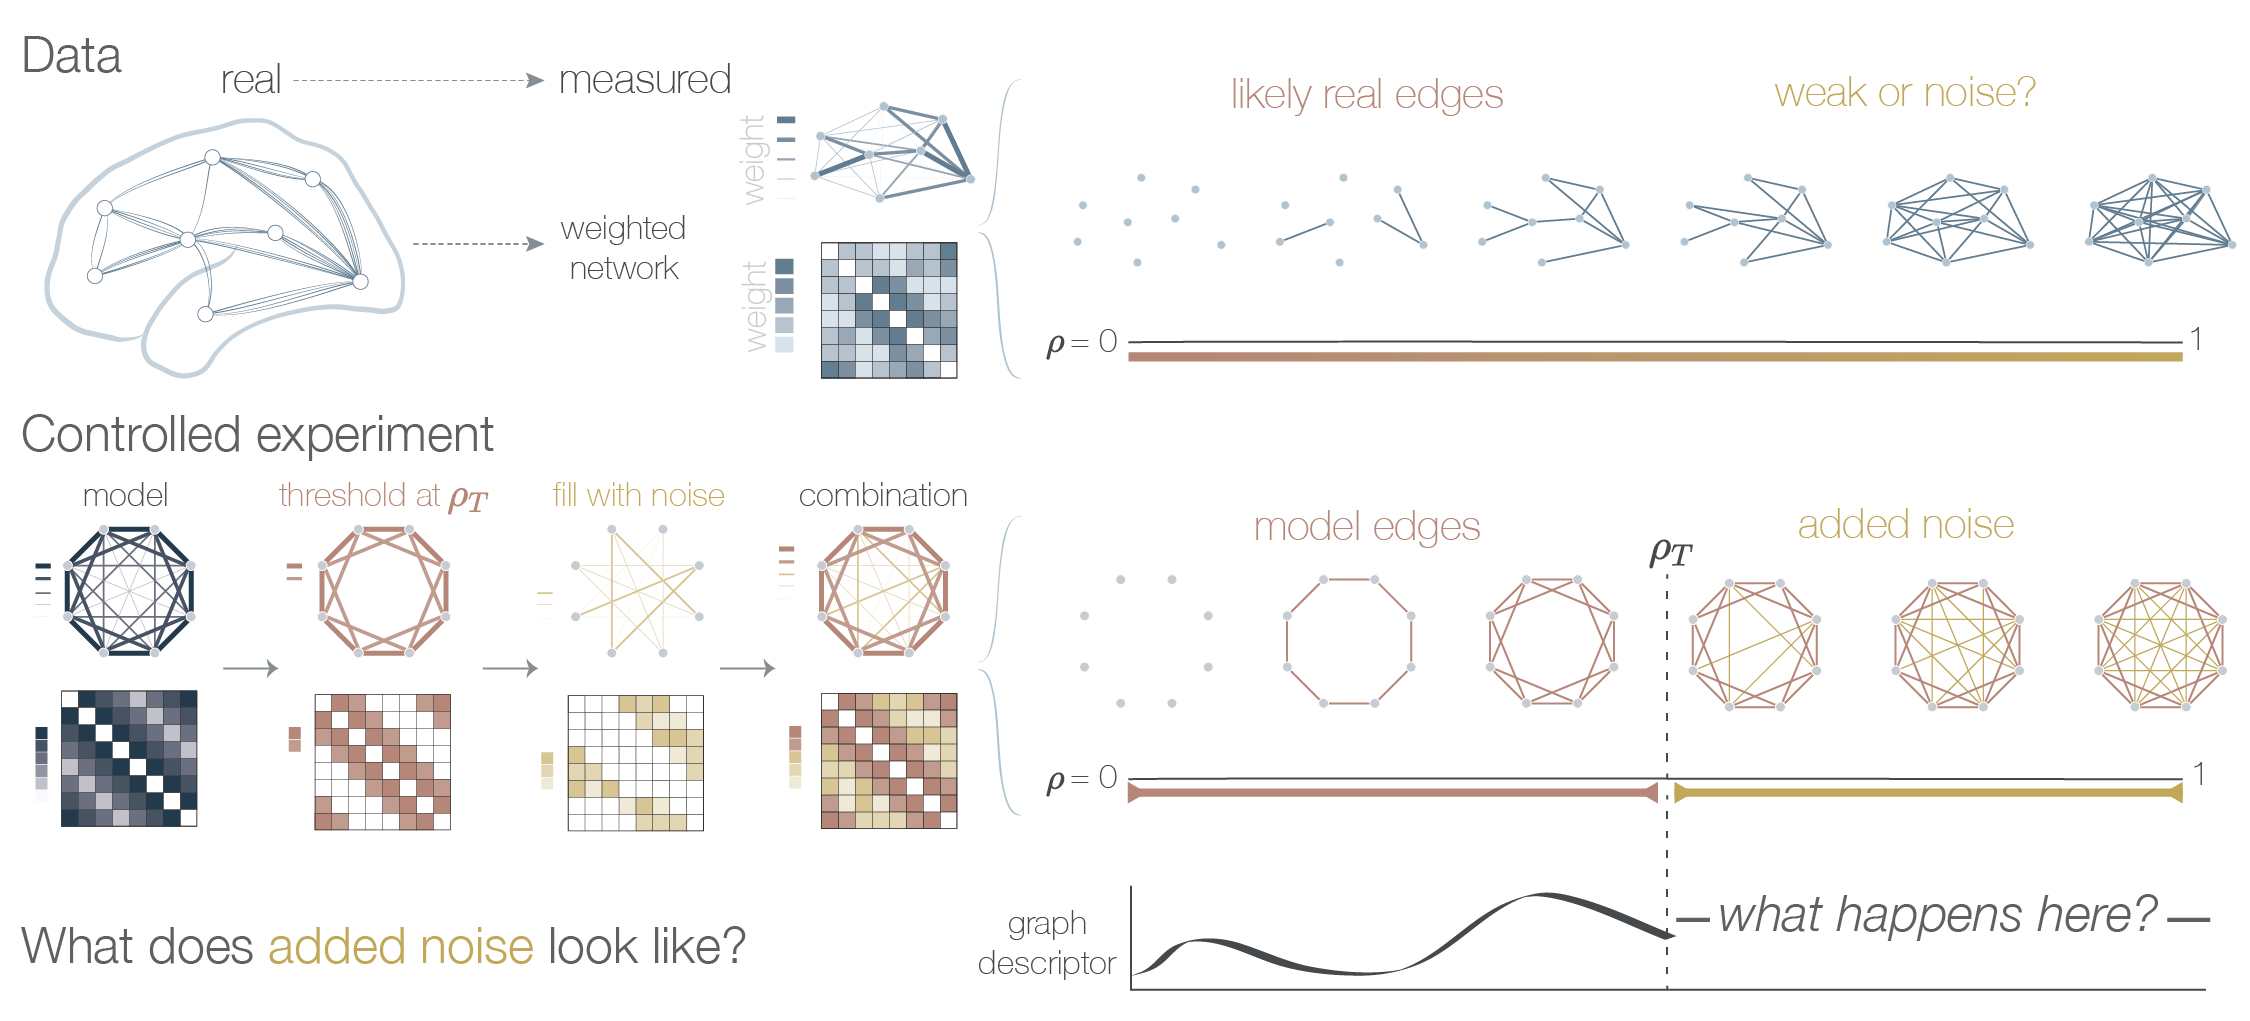 Data contains real connections and noise from observations. Our experiments adress how noise affects data analyses
        by adding noise to model weighted networks.